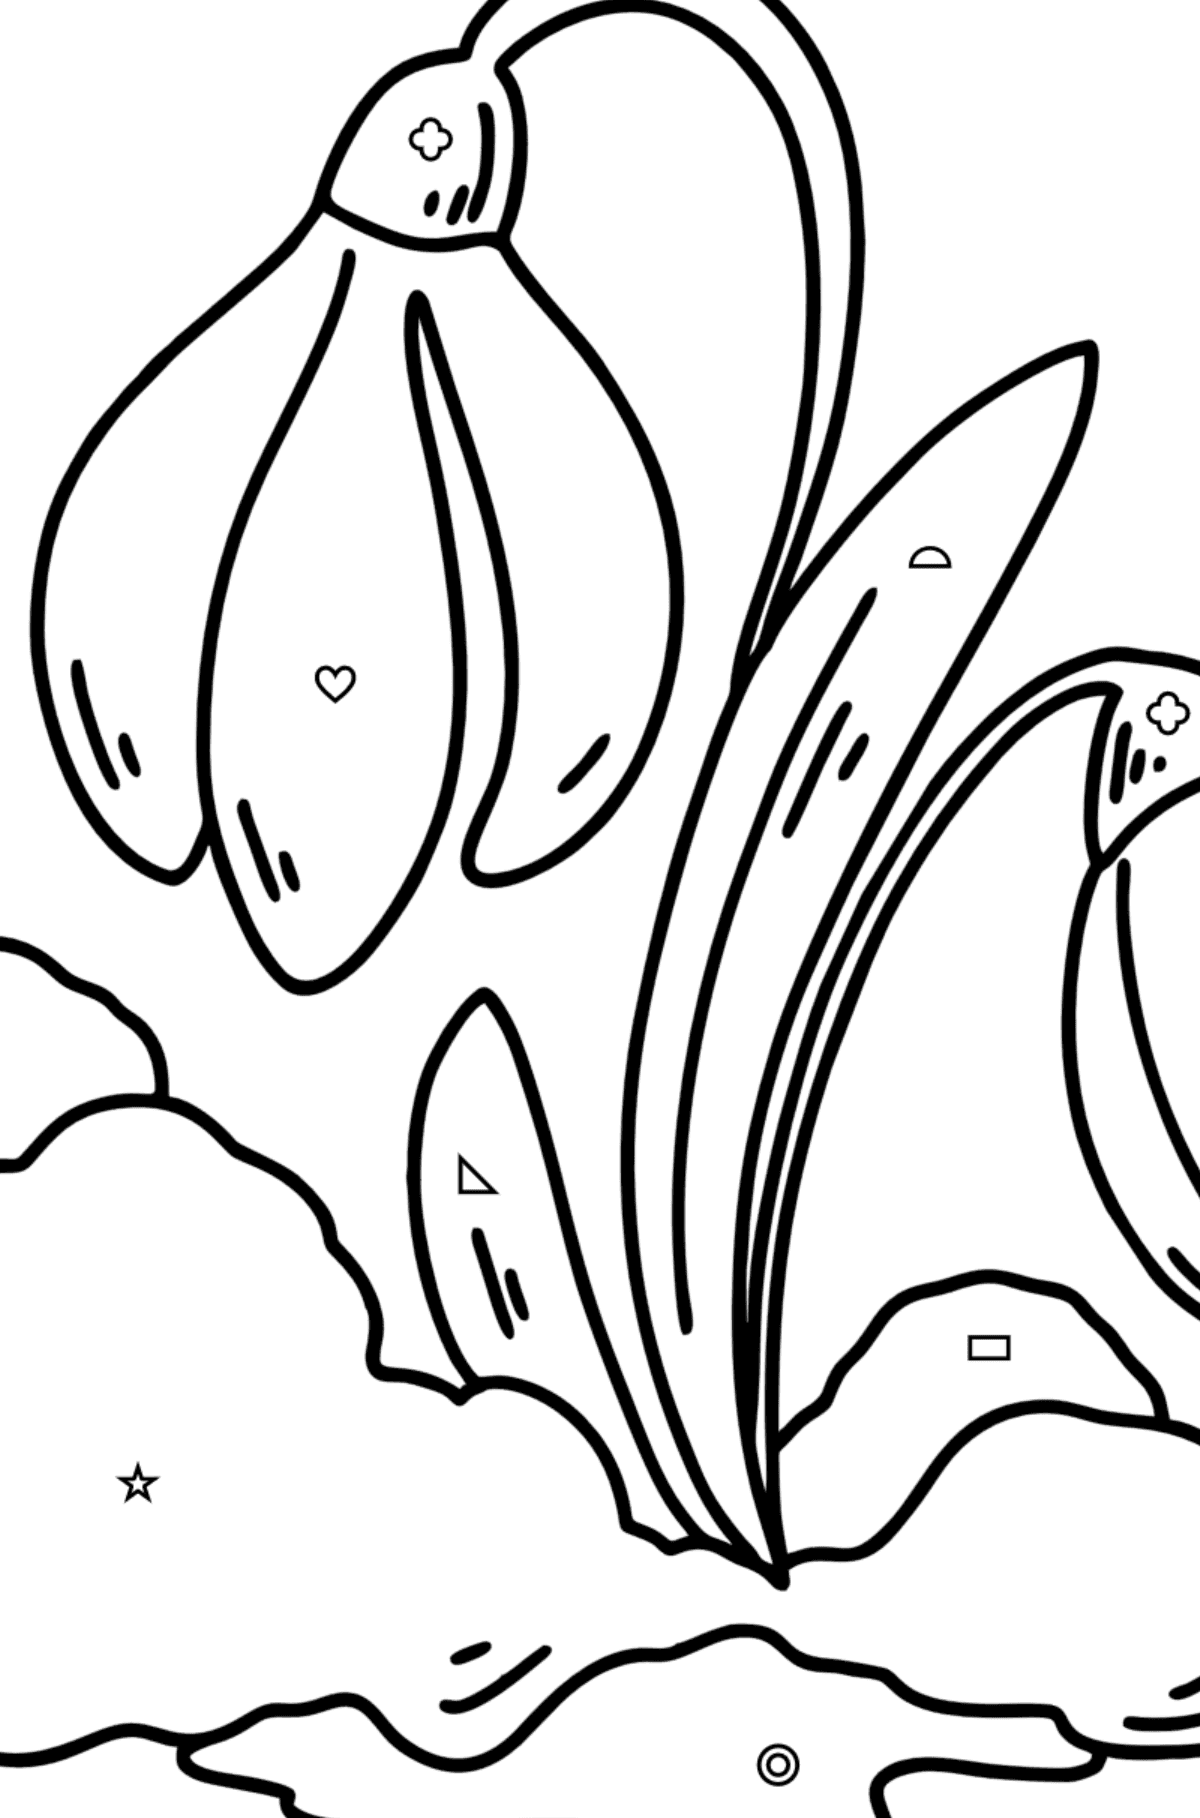 Spring Snowdrops coloring page - Coloring by Geometric Shapes for Kids